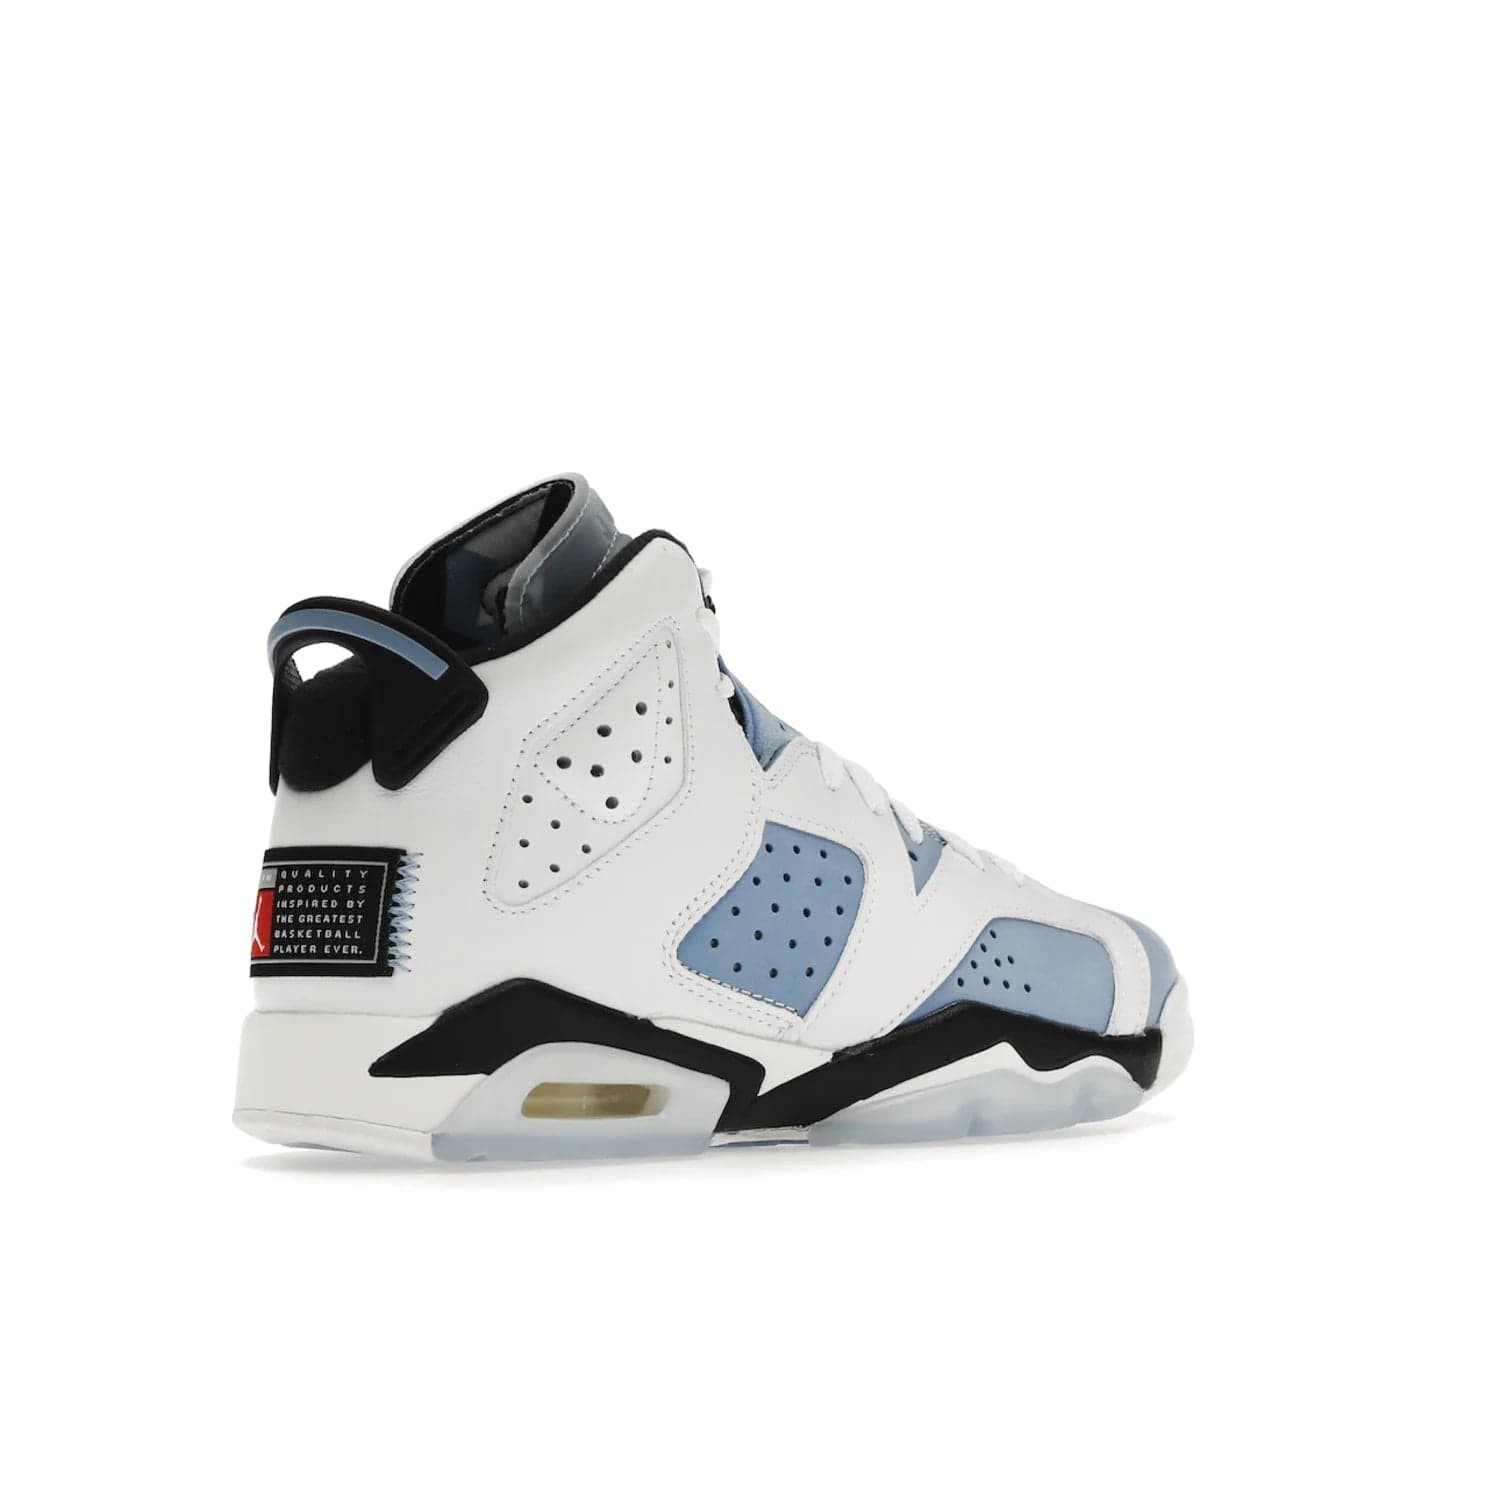 Jordan 6 Retro UNC White (GS) - Image 33 - Only at www.BallersClubKickz.com - Air Jordan 6 Retro UNC White GS: Michael Jordan alma mater, UNC Tar Heels, featuring colorway, nubuck, leather, Jumpman branding and a visible Air unit. Translucent blue/white outsole, perfect for completing sneaker rotation.